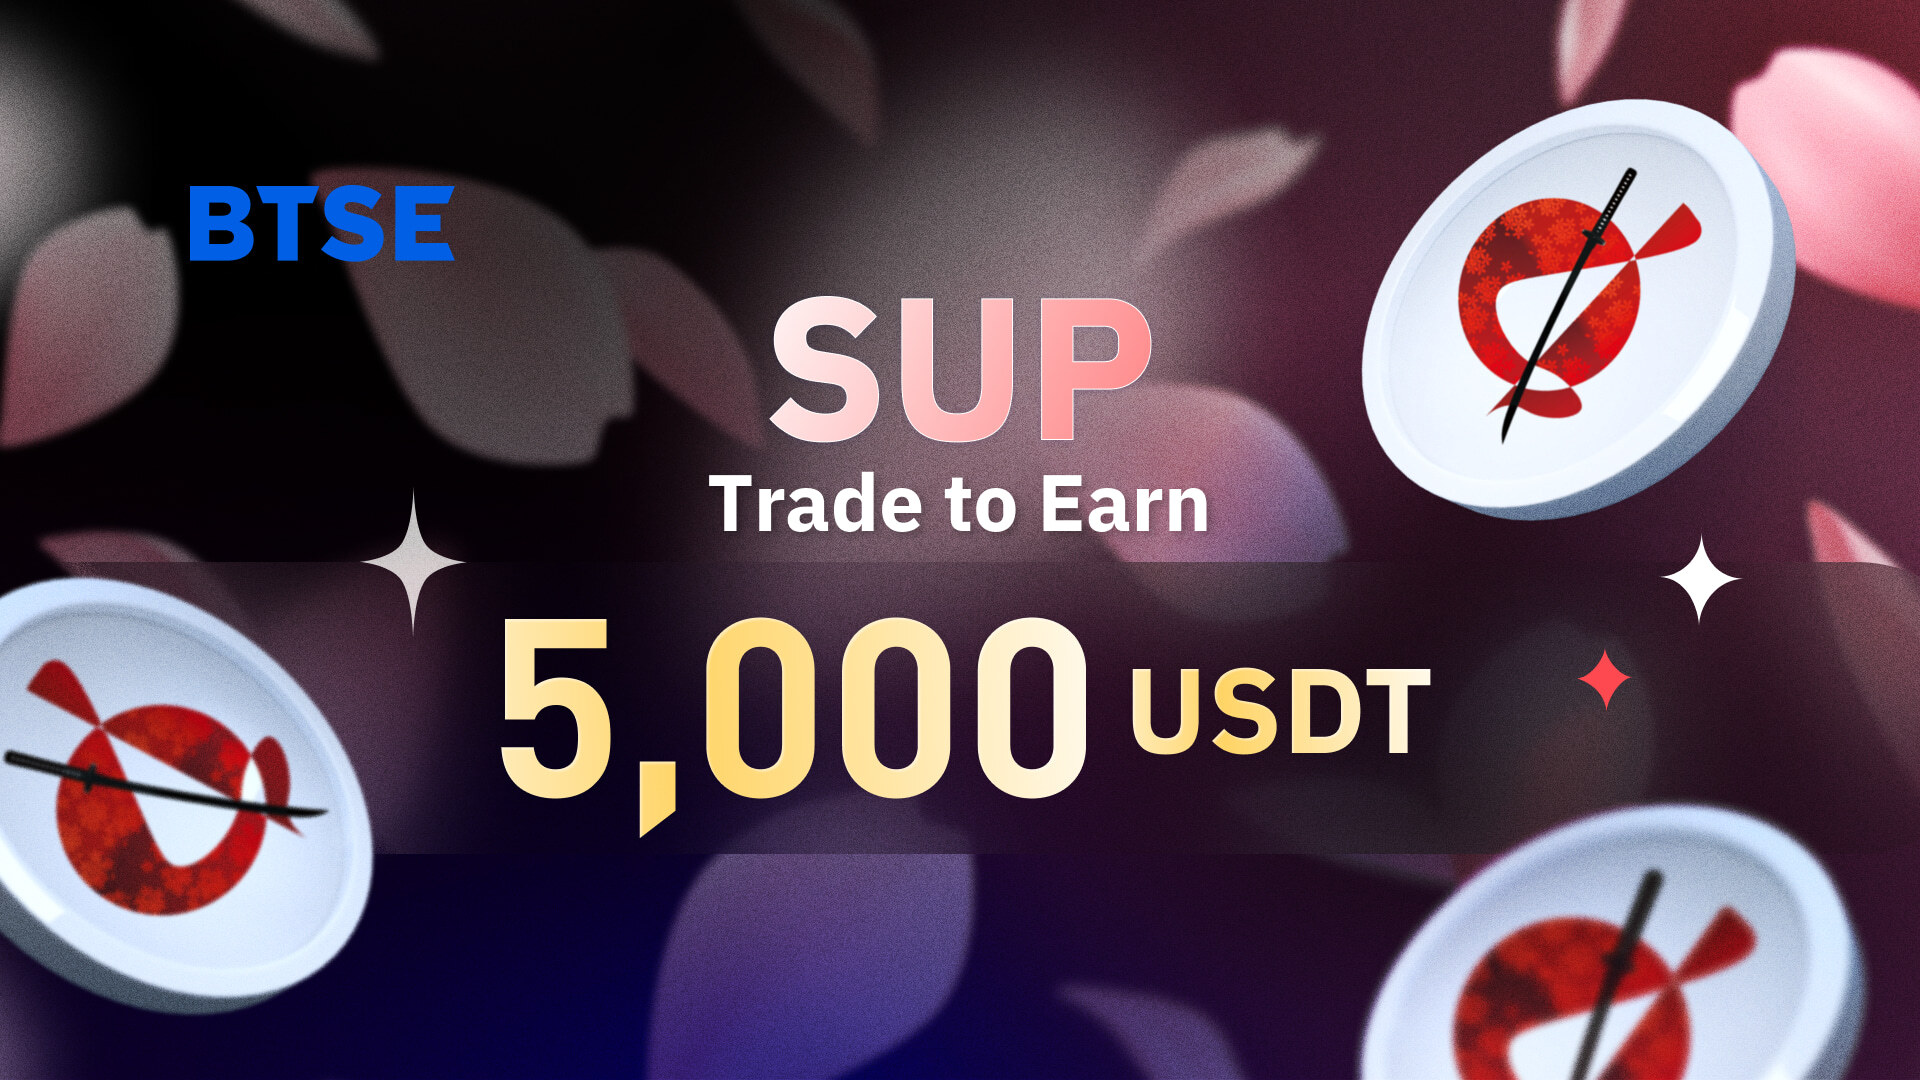 SUP Is Here! Join the Celebration for a Chance to Win Big with BTSE’s $5,000 USDT Prize Pool!